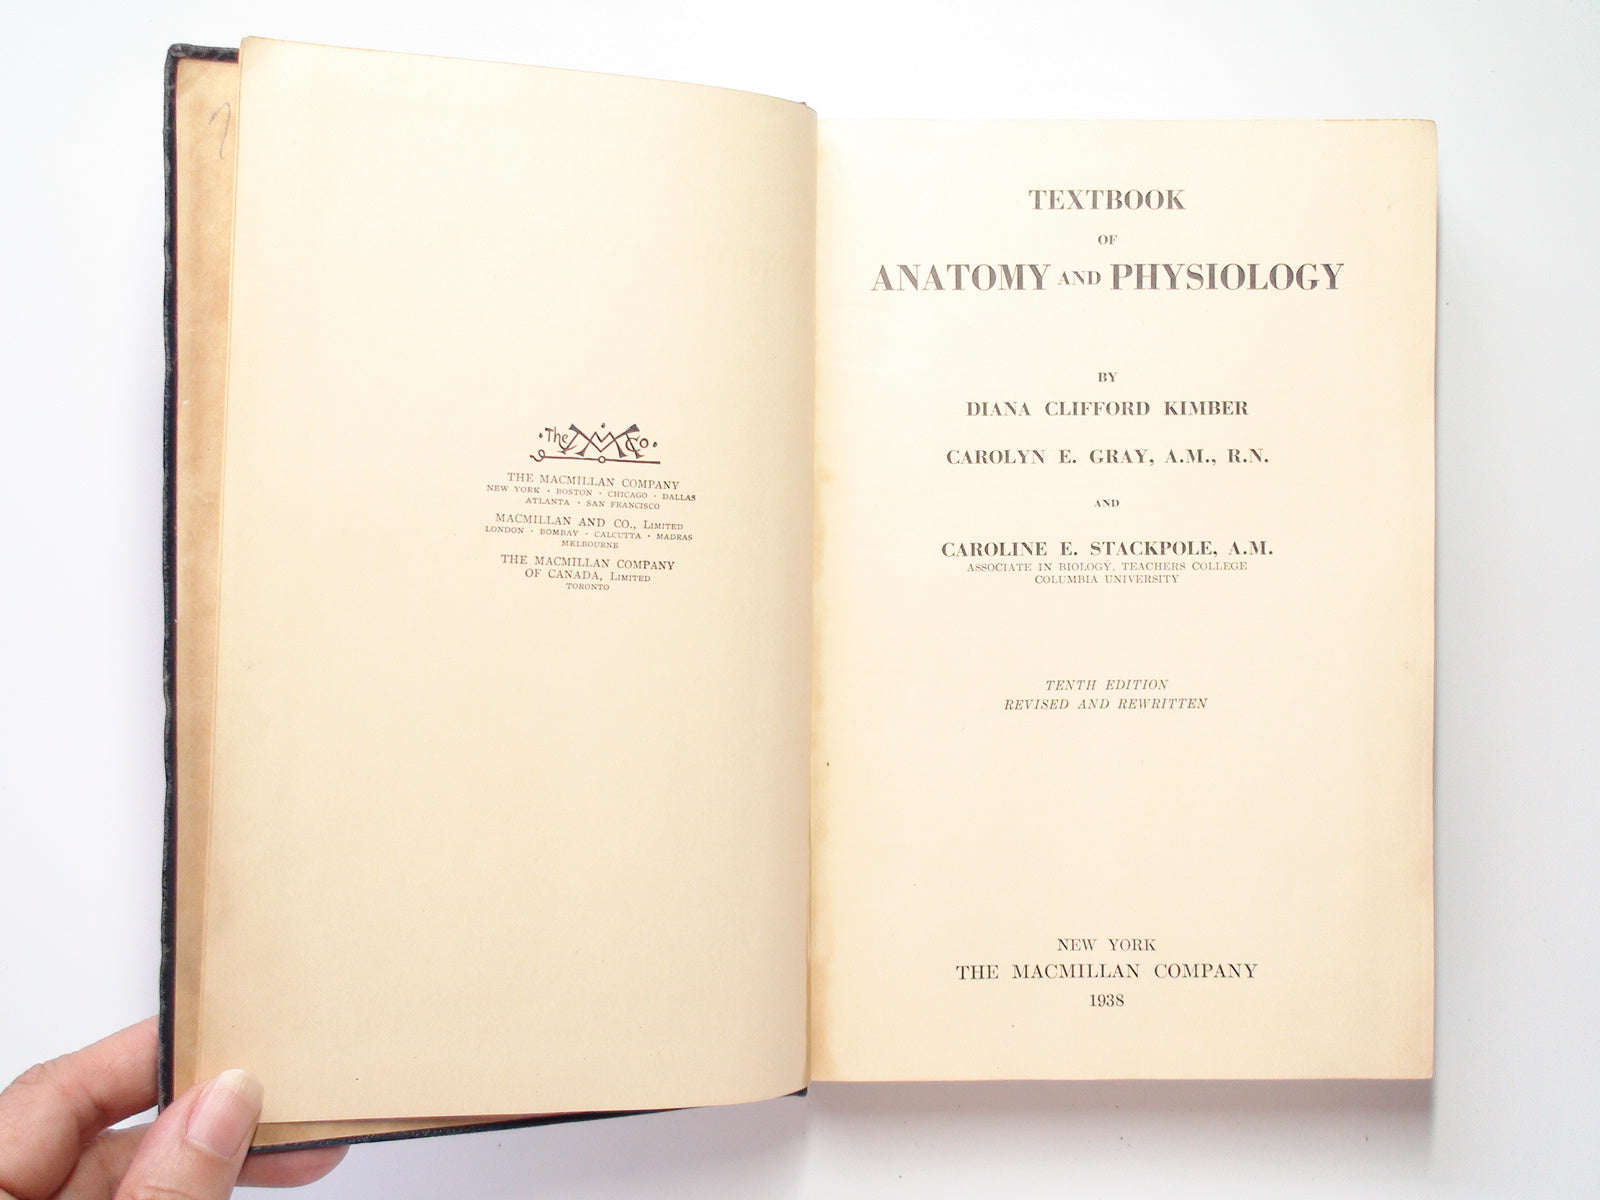 Textbook of Anatomy and Physiology by Diana Clifford Kimber, 10th Ed, 1938